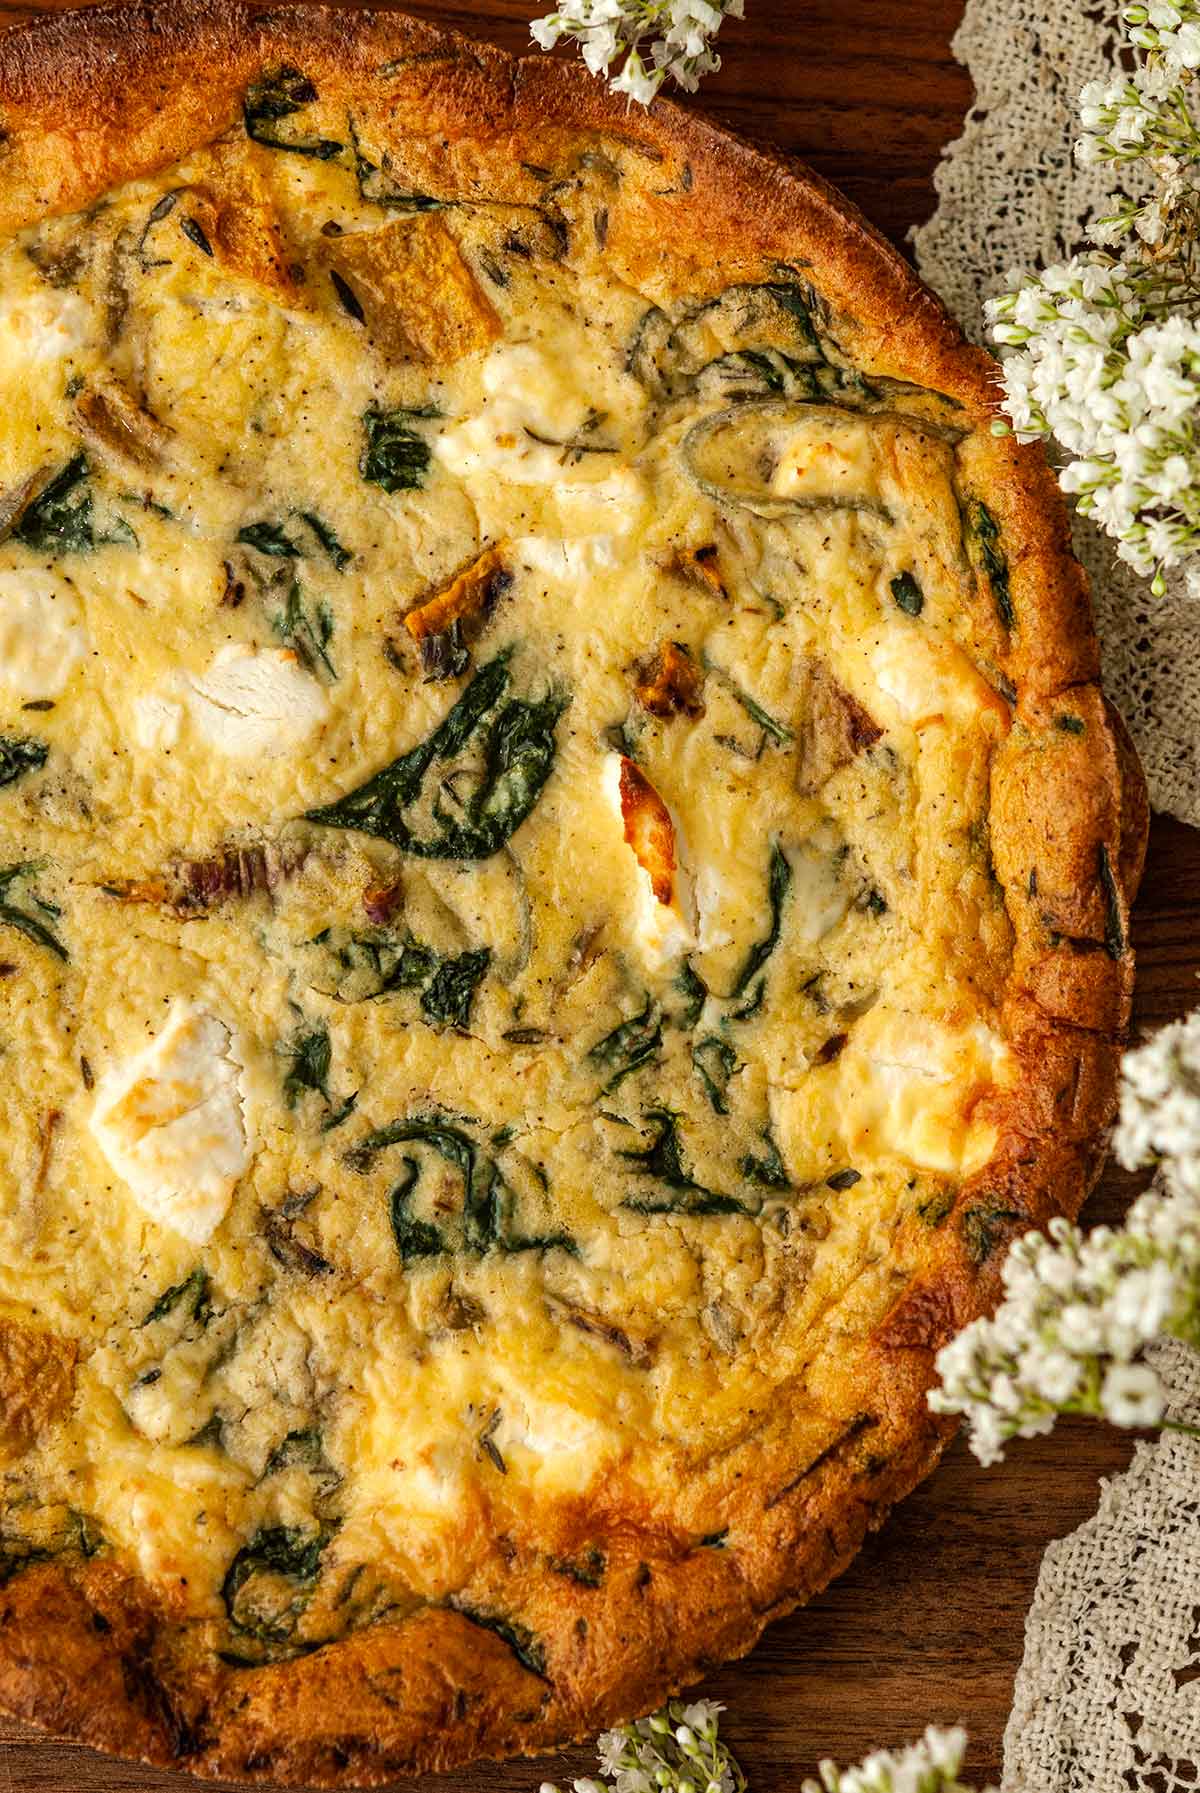 A butternut squash goat cheese quiche surrounded by flowers and lace.